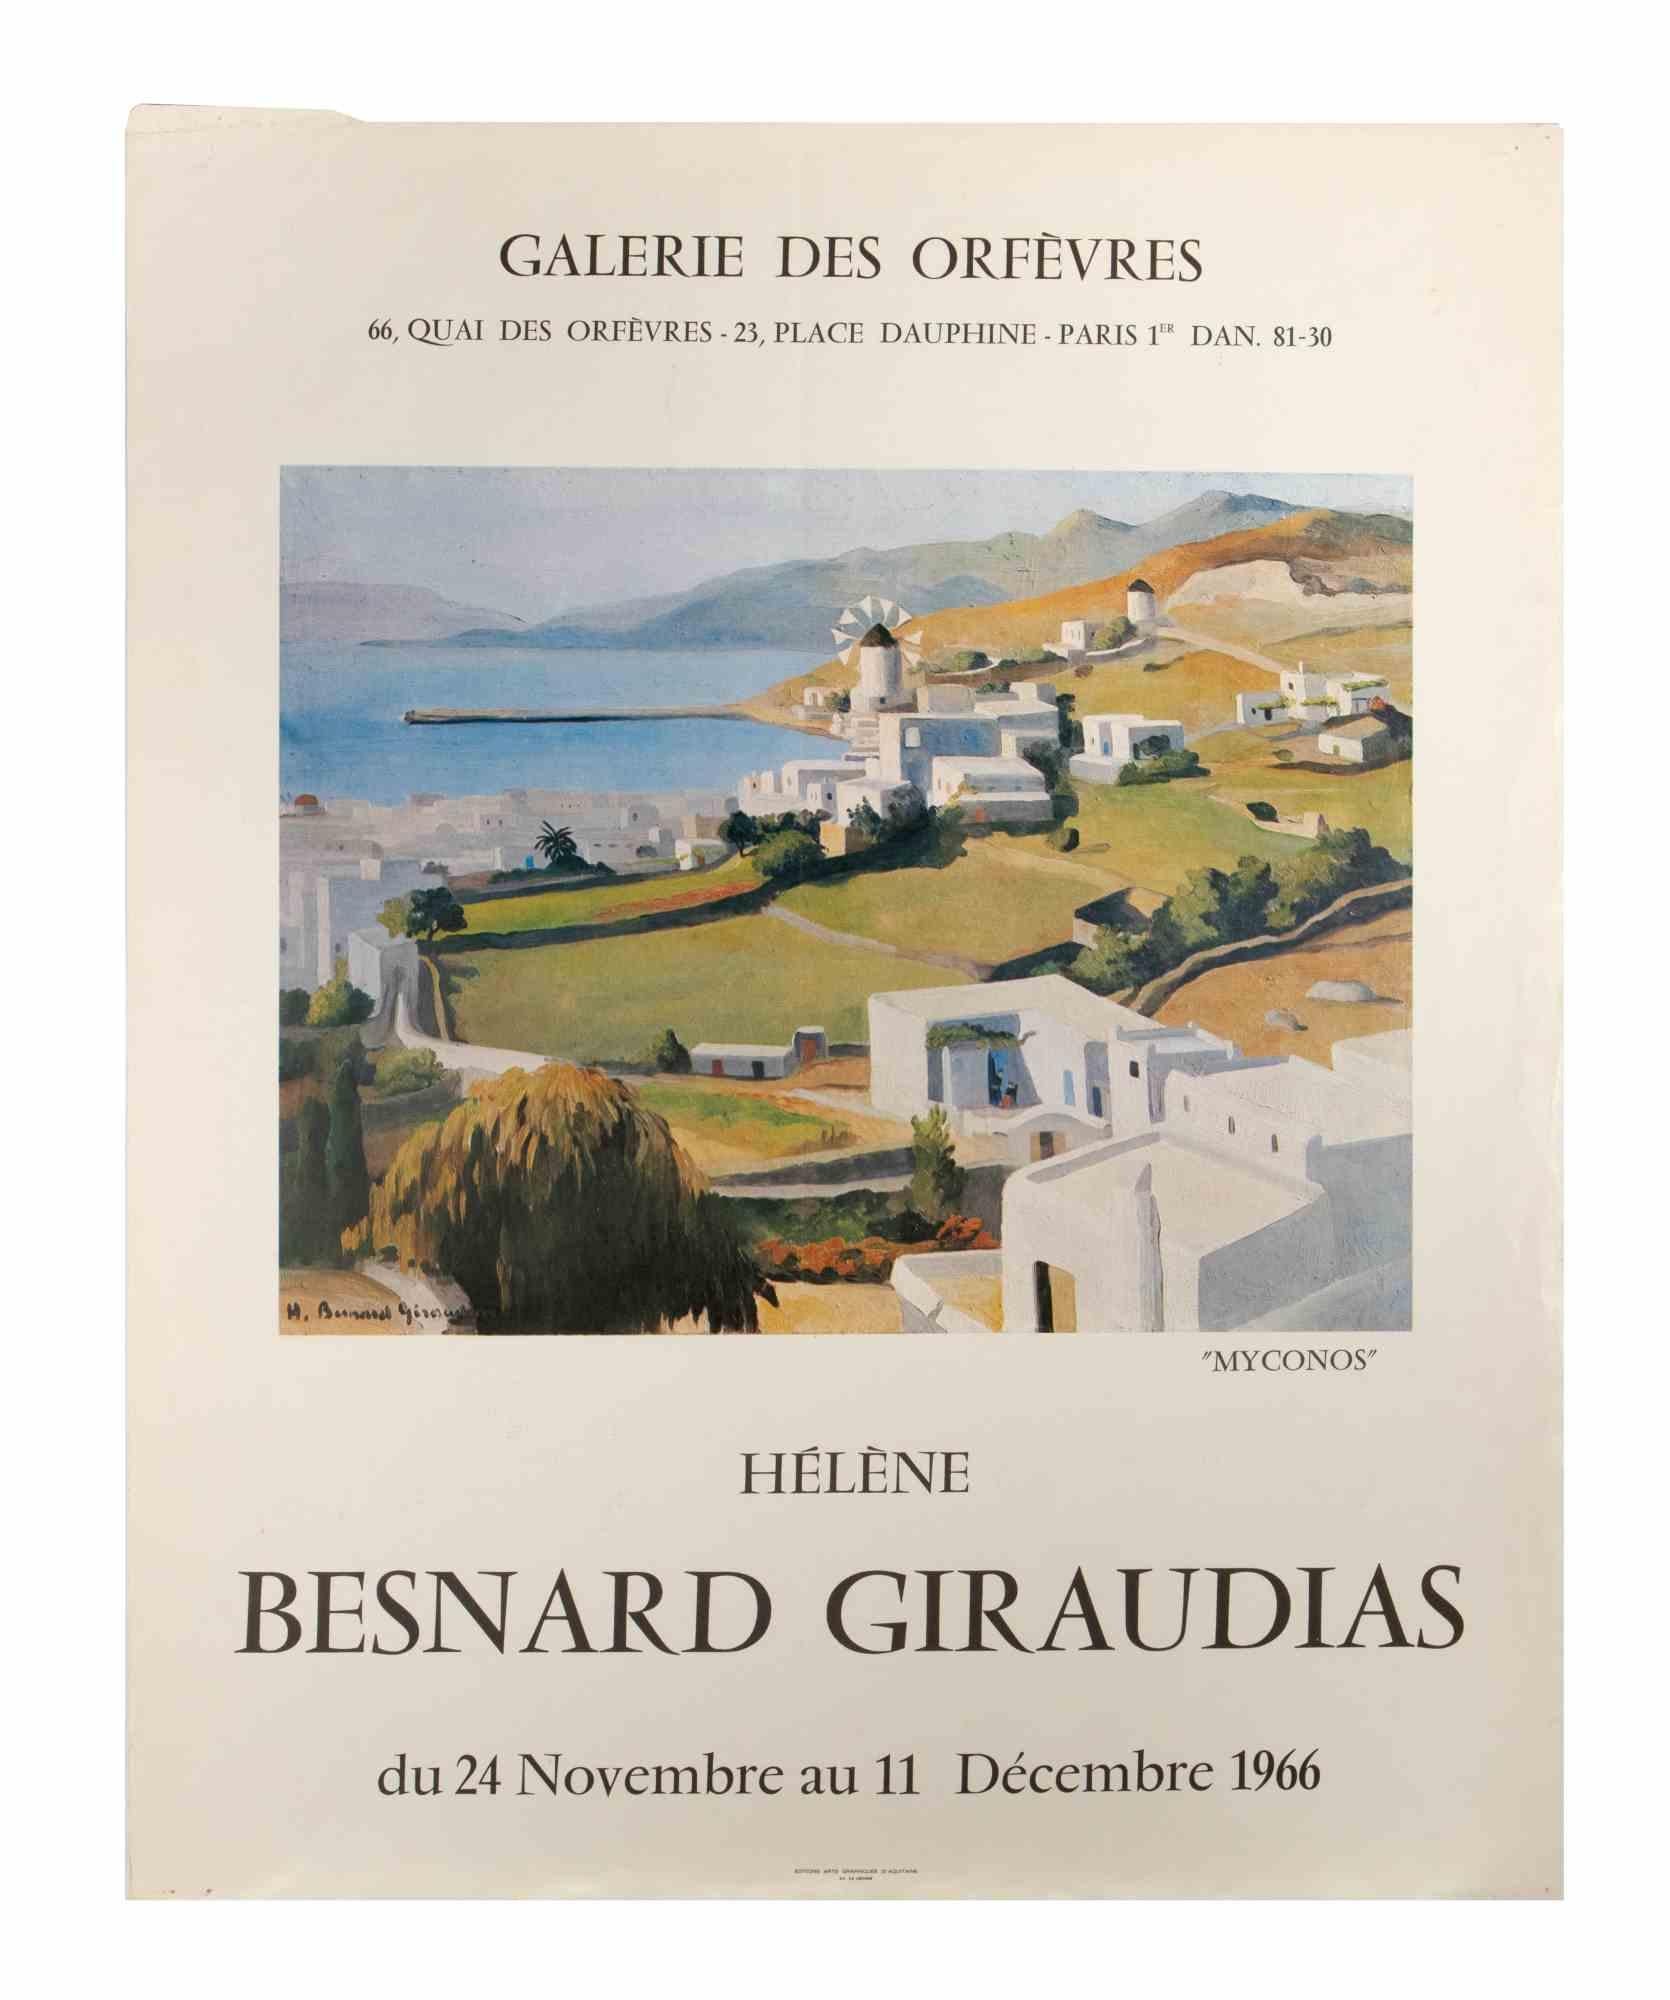 Hélène Besnard-Giraudias is a vintage Poster realized for the exhibition of Hélène Besnard-Giraudias in 1966.

In Paris from November to December 1966 to the Galerie Des Orfèvres .

Good condition, signed by the artist.

Hélène Besnard-Giraudias